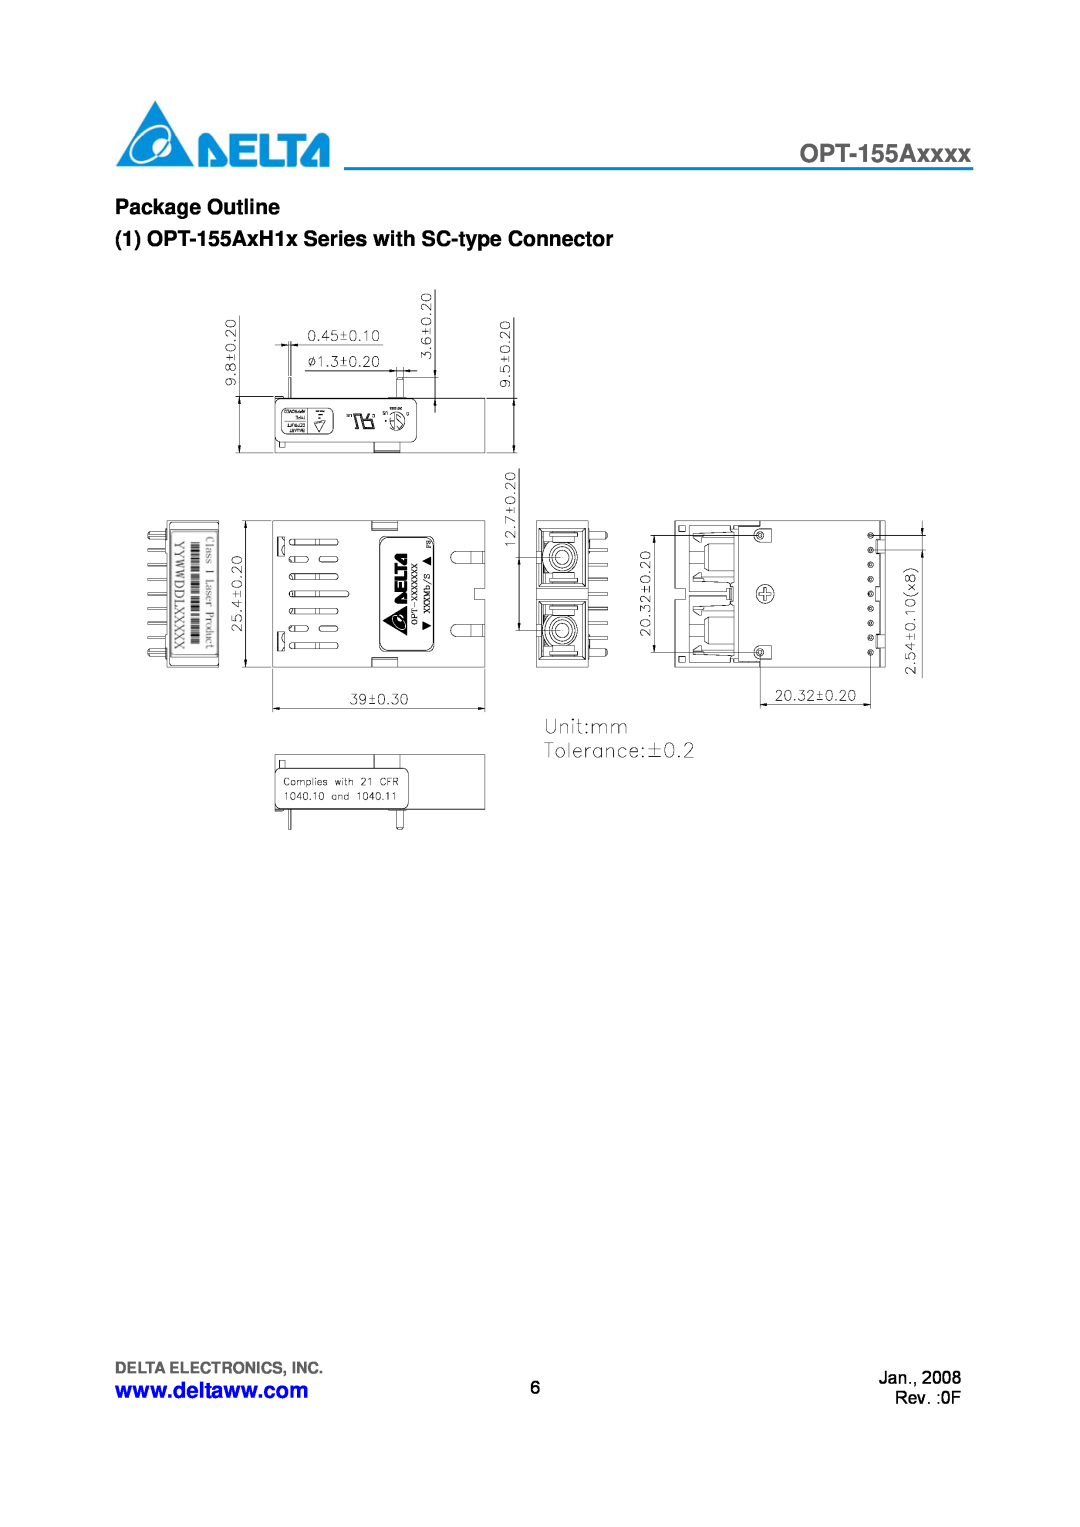 Delta Electronics OPT-155Axxxx manual Package Outline 1 OPT-155AxH1x Series with SC-type Connector, Delta Electronics, Inc 